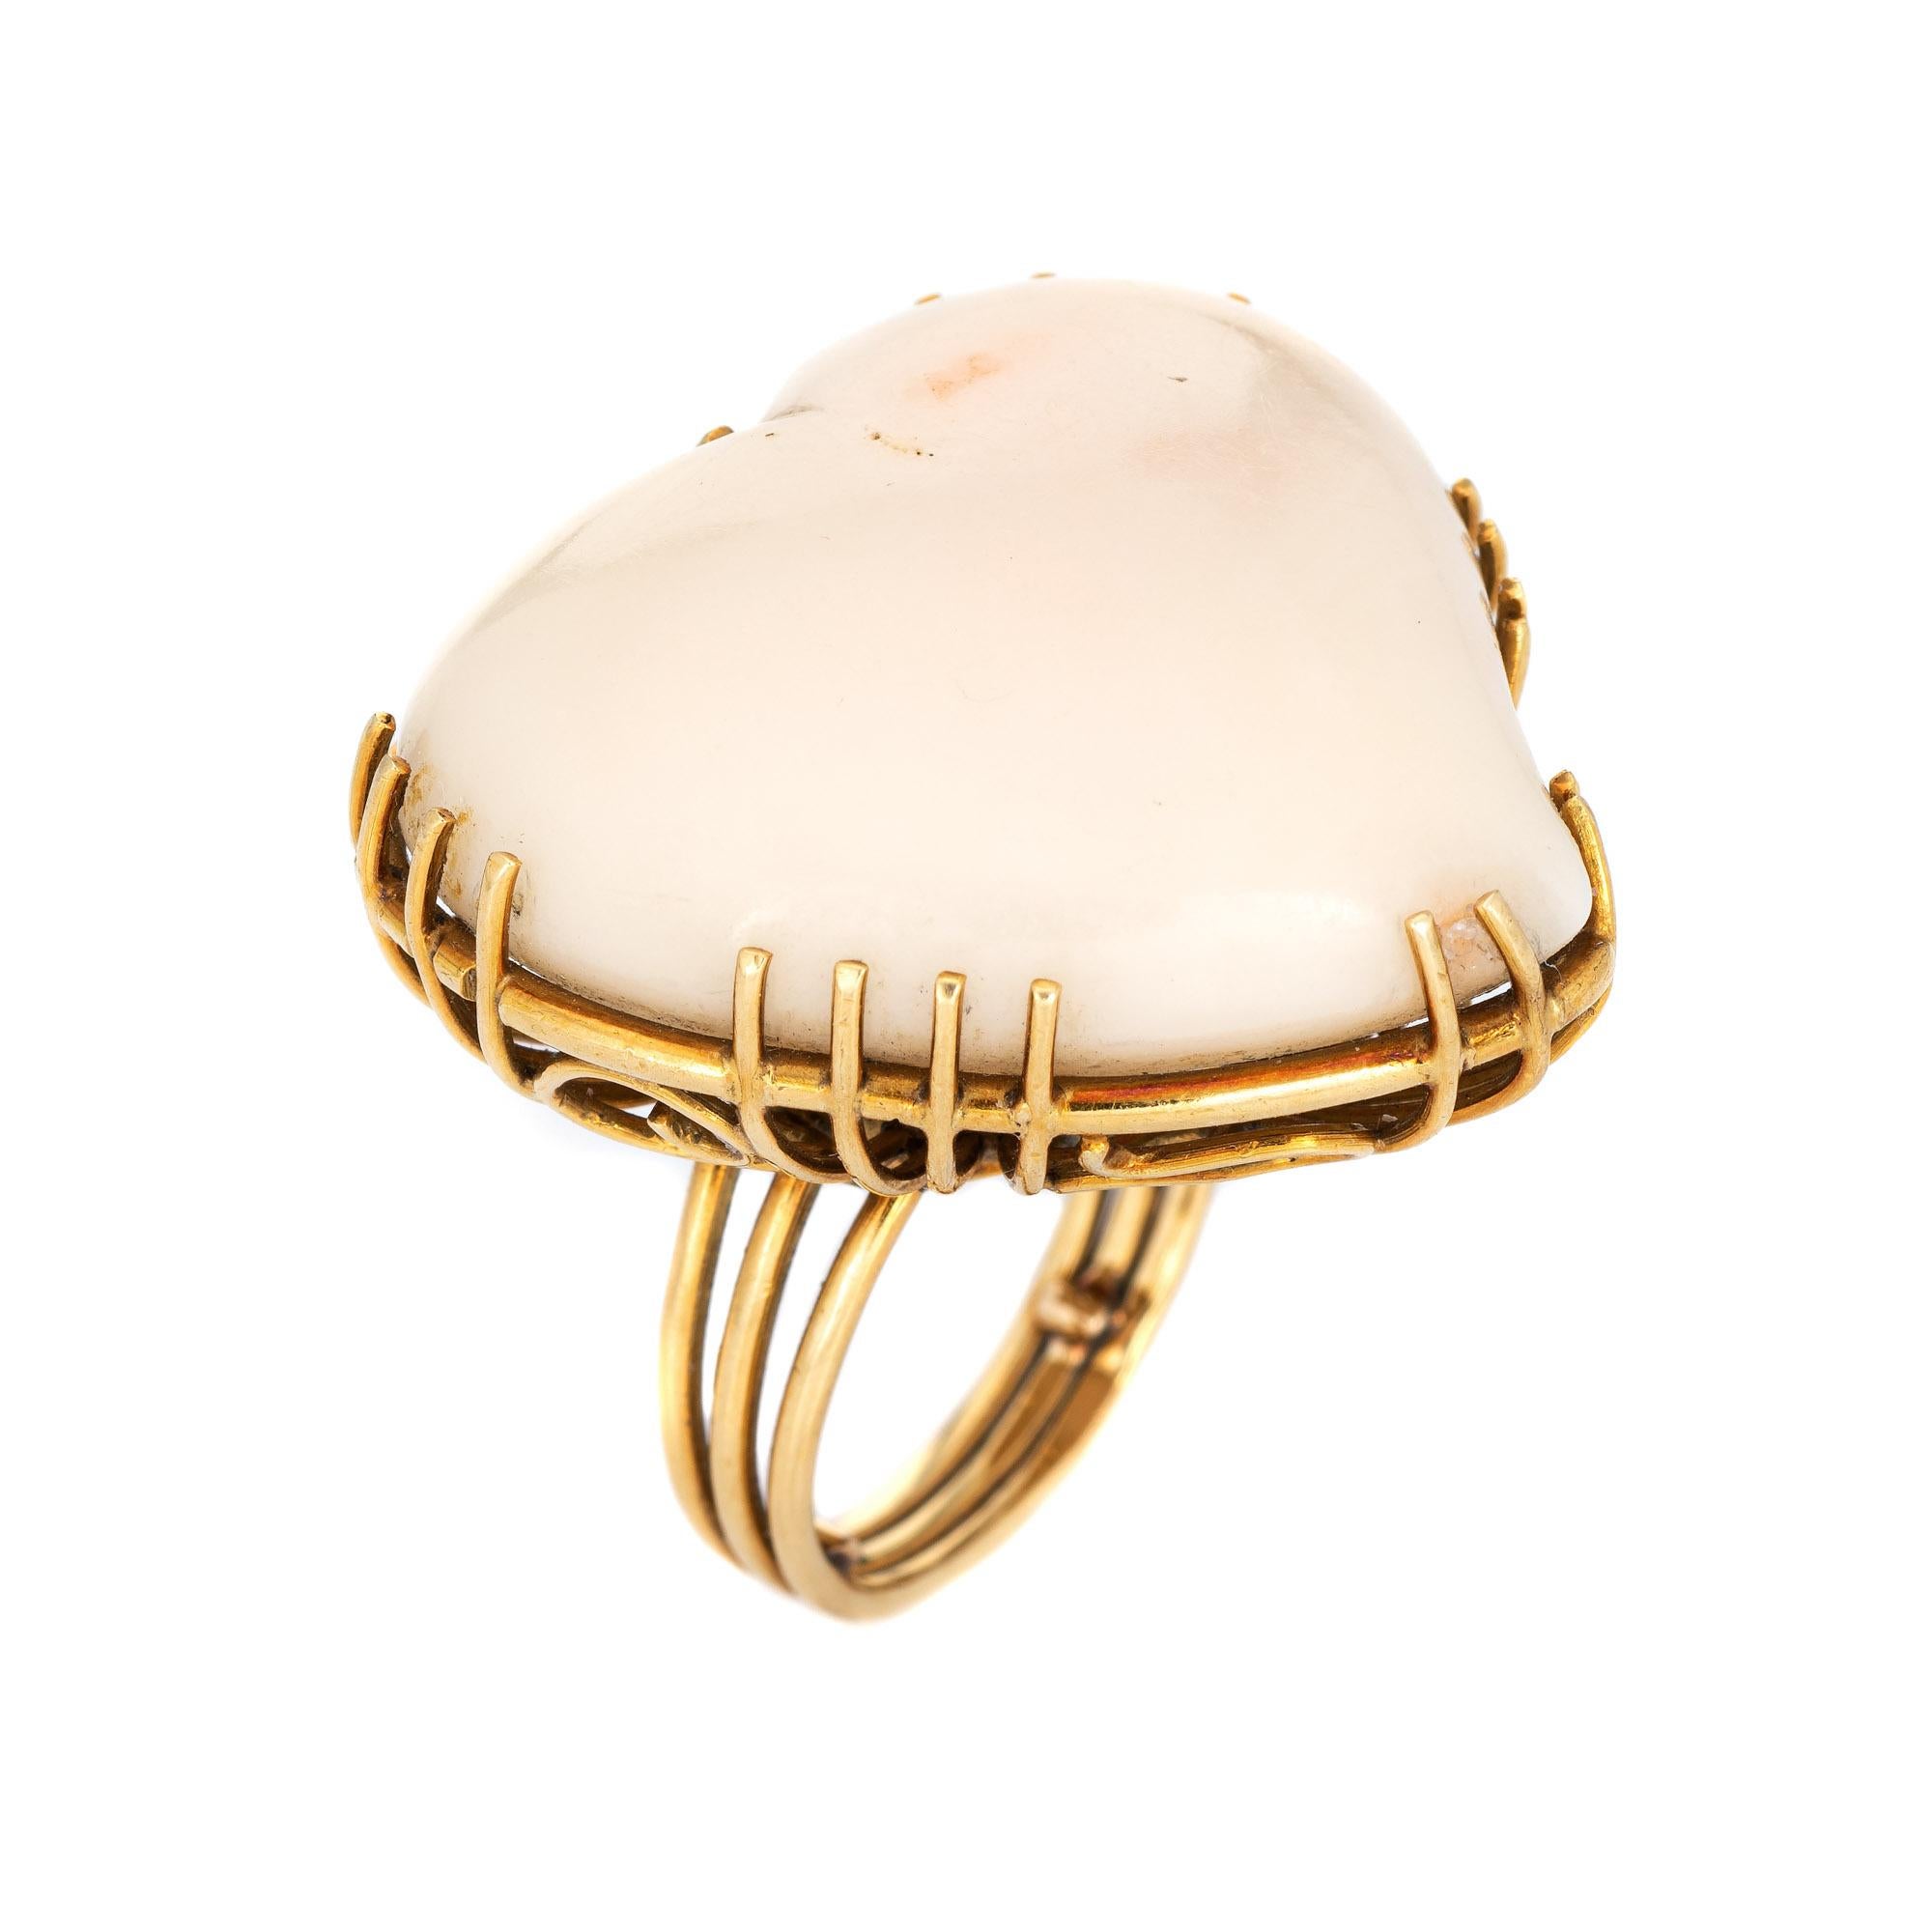 Stylish vintage huge angel skin coral heart cocktail ring (circa 1960s) crafted in 18 karat yellow gold. 

Angel skin coral cabochon measures 30mm x 29mm (estimated at 65 carats). The coral is in excellent condition and free of cracks or chips.